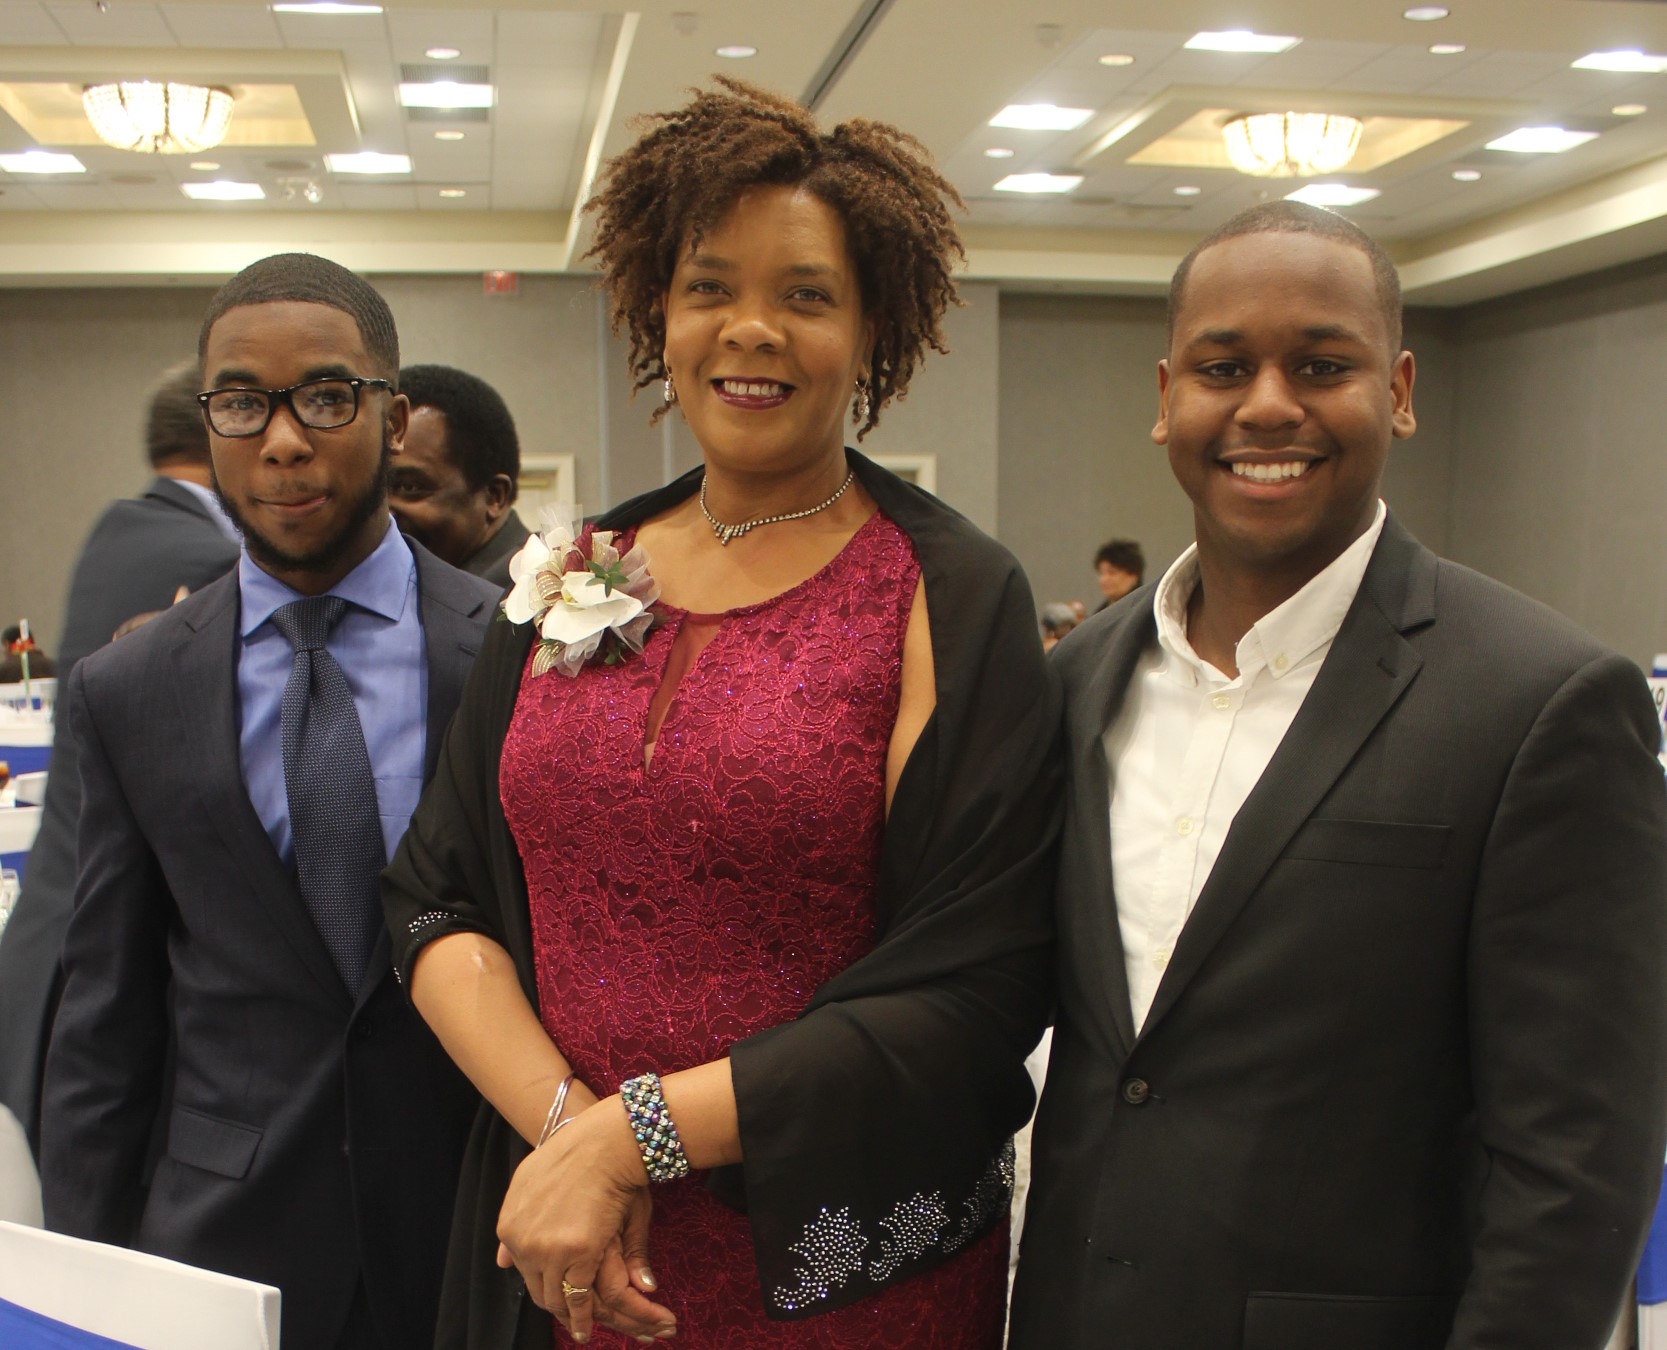 dr. hunter naacp gala with students copy